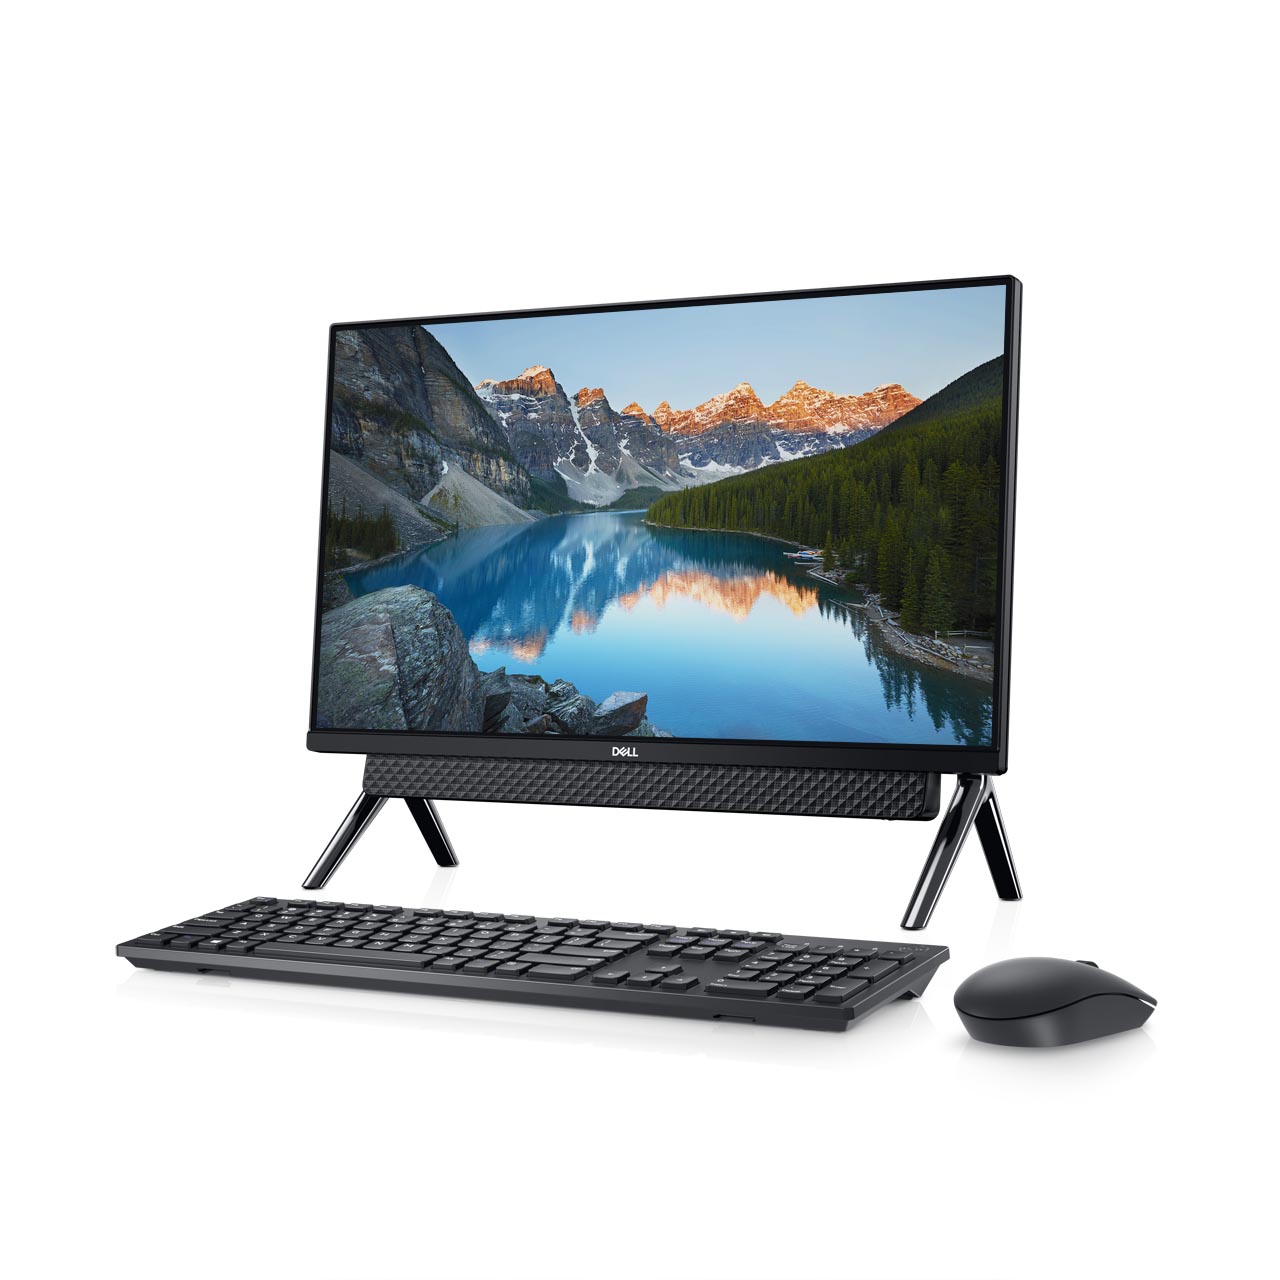 Inspiron 24 5000 (5490) All-in-One